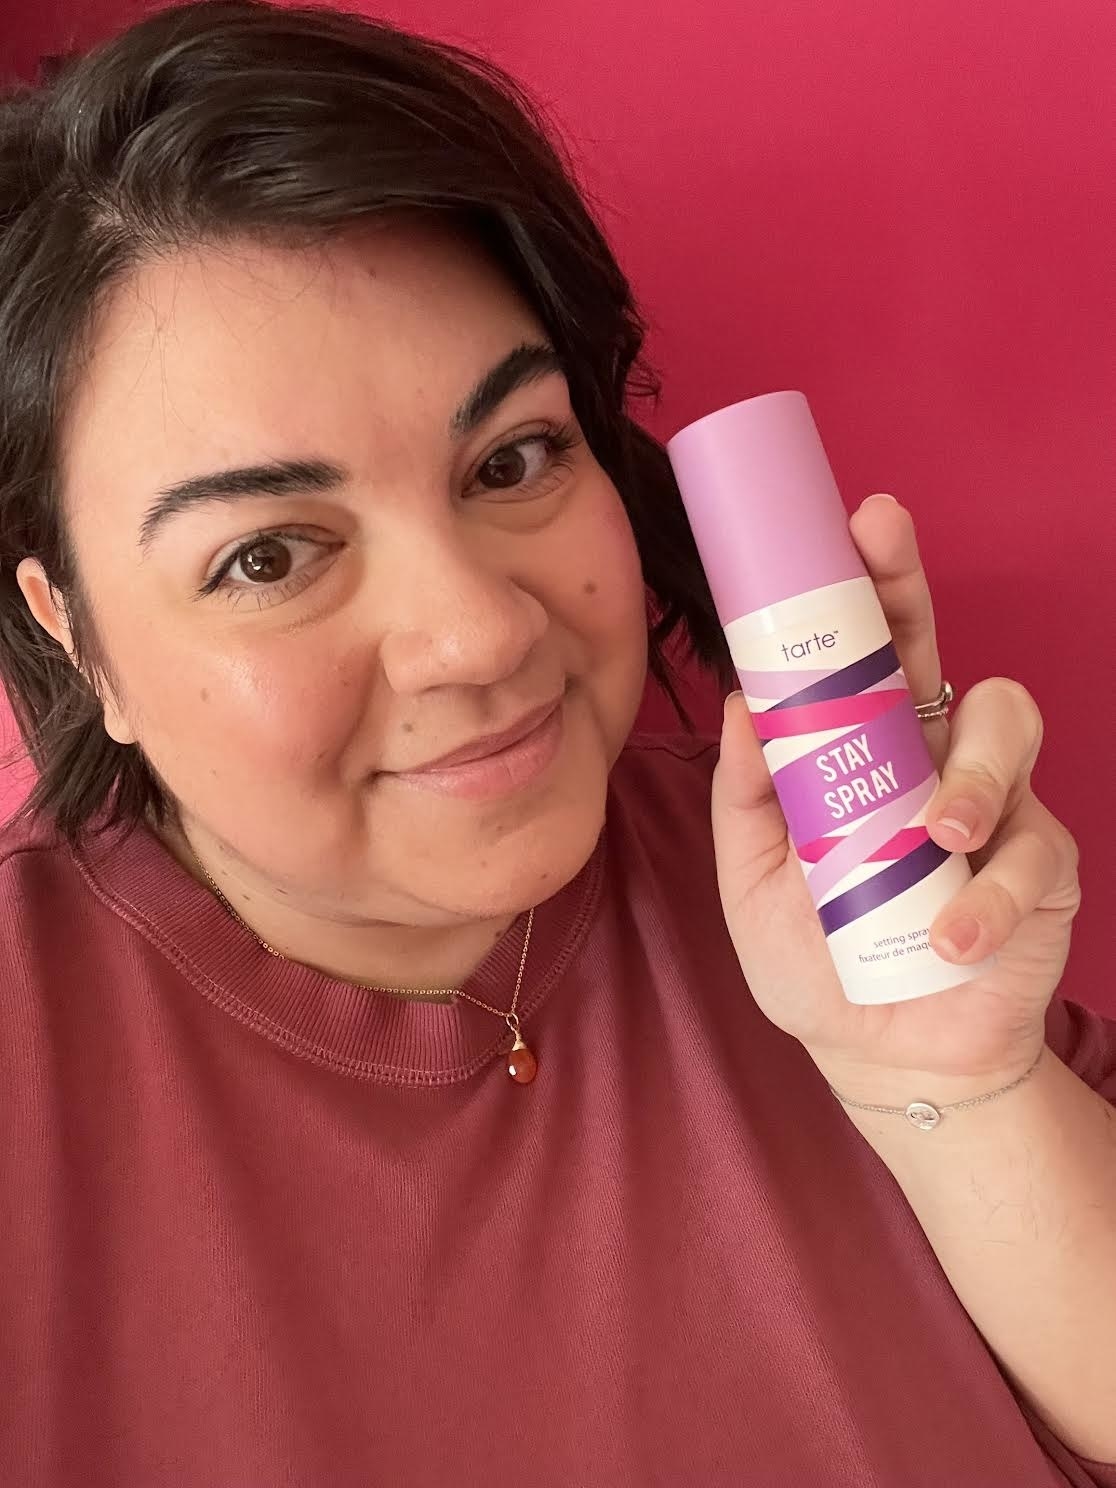 Bianca holding up a bottle of the setting spray next to her face